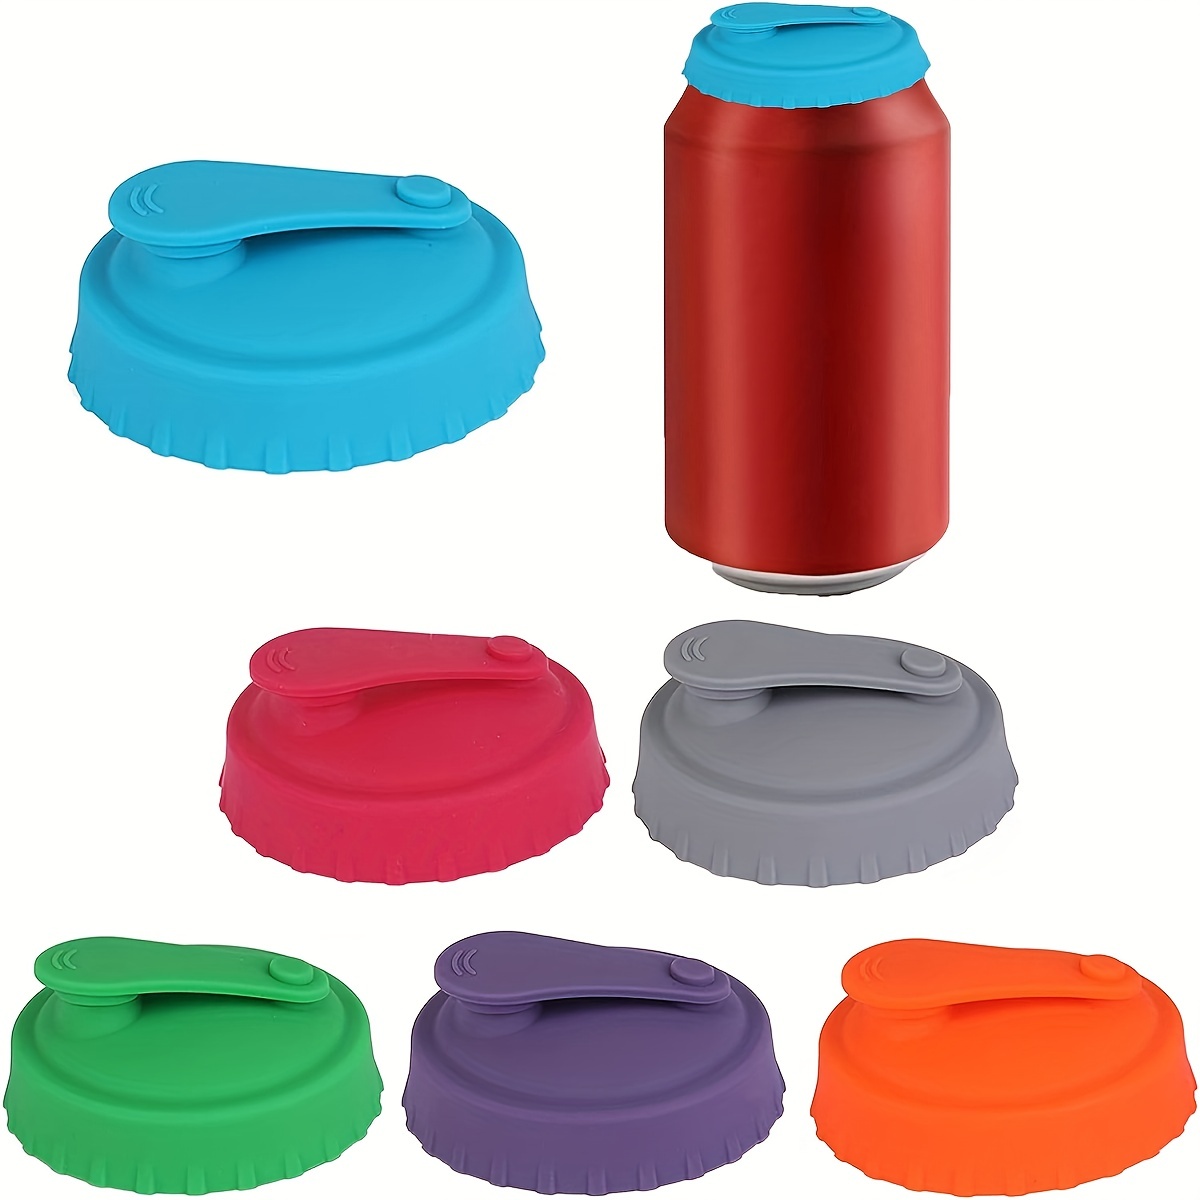 Can Covers for Soda, Beer, Energy Drink Cans/ Standard, Slim, Tall